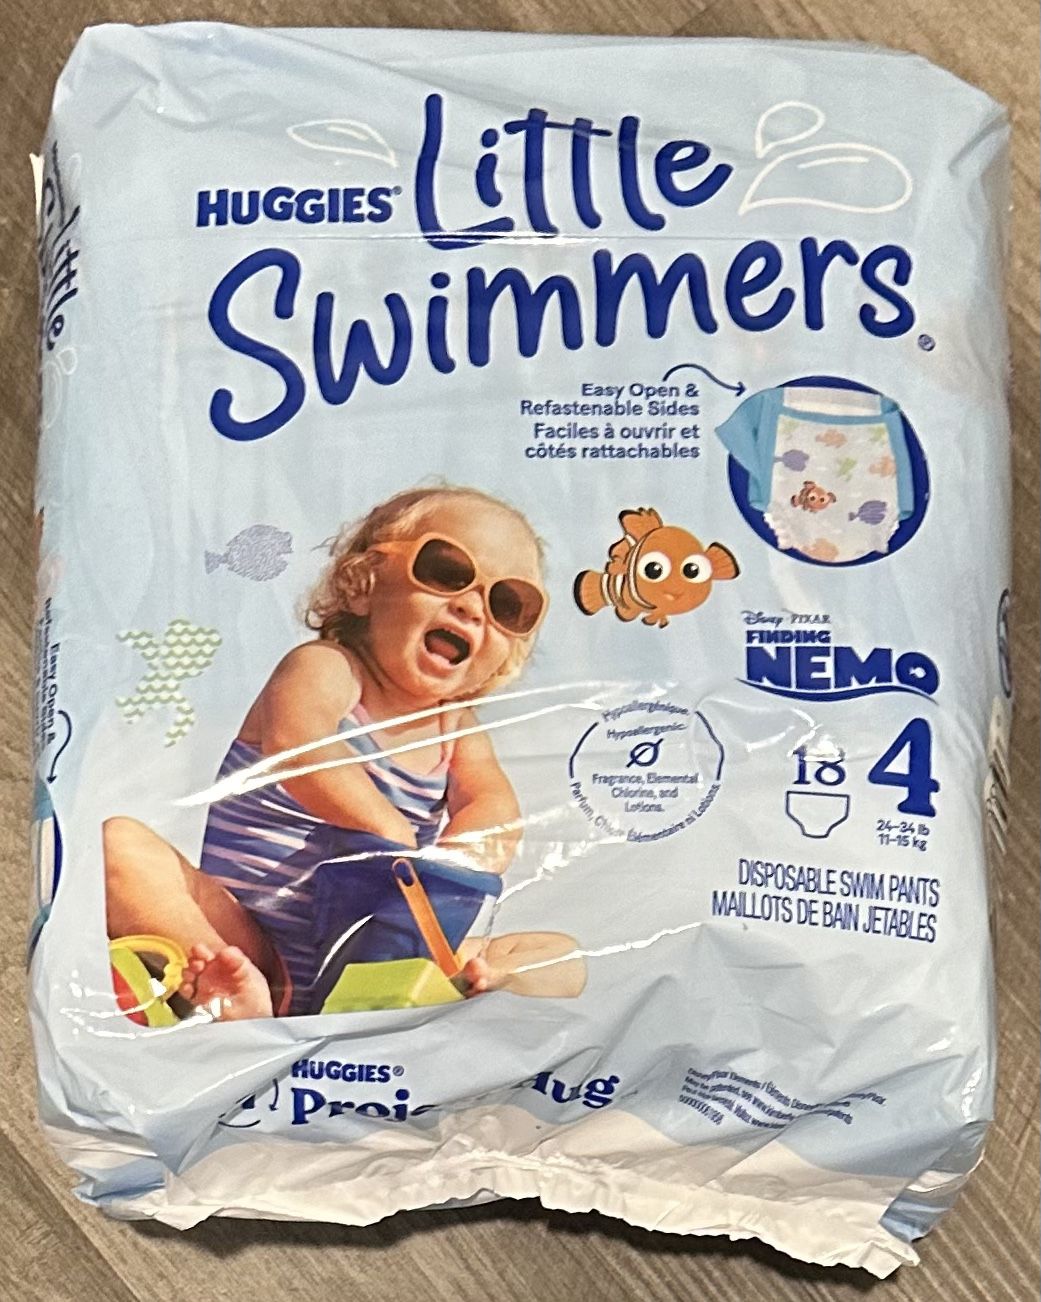 Huggies Little Swimmers Diapers: 18 swim diapers, size 4